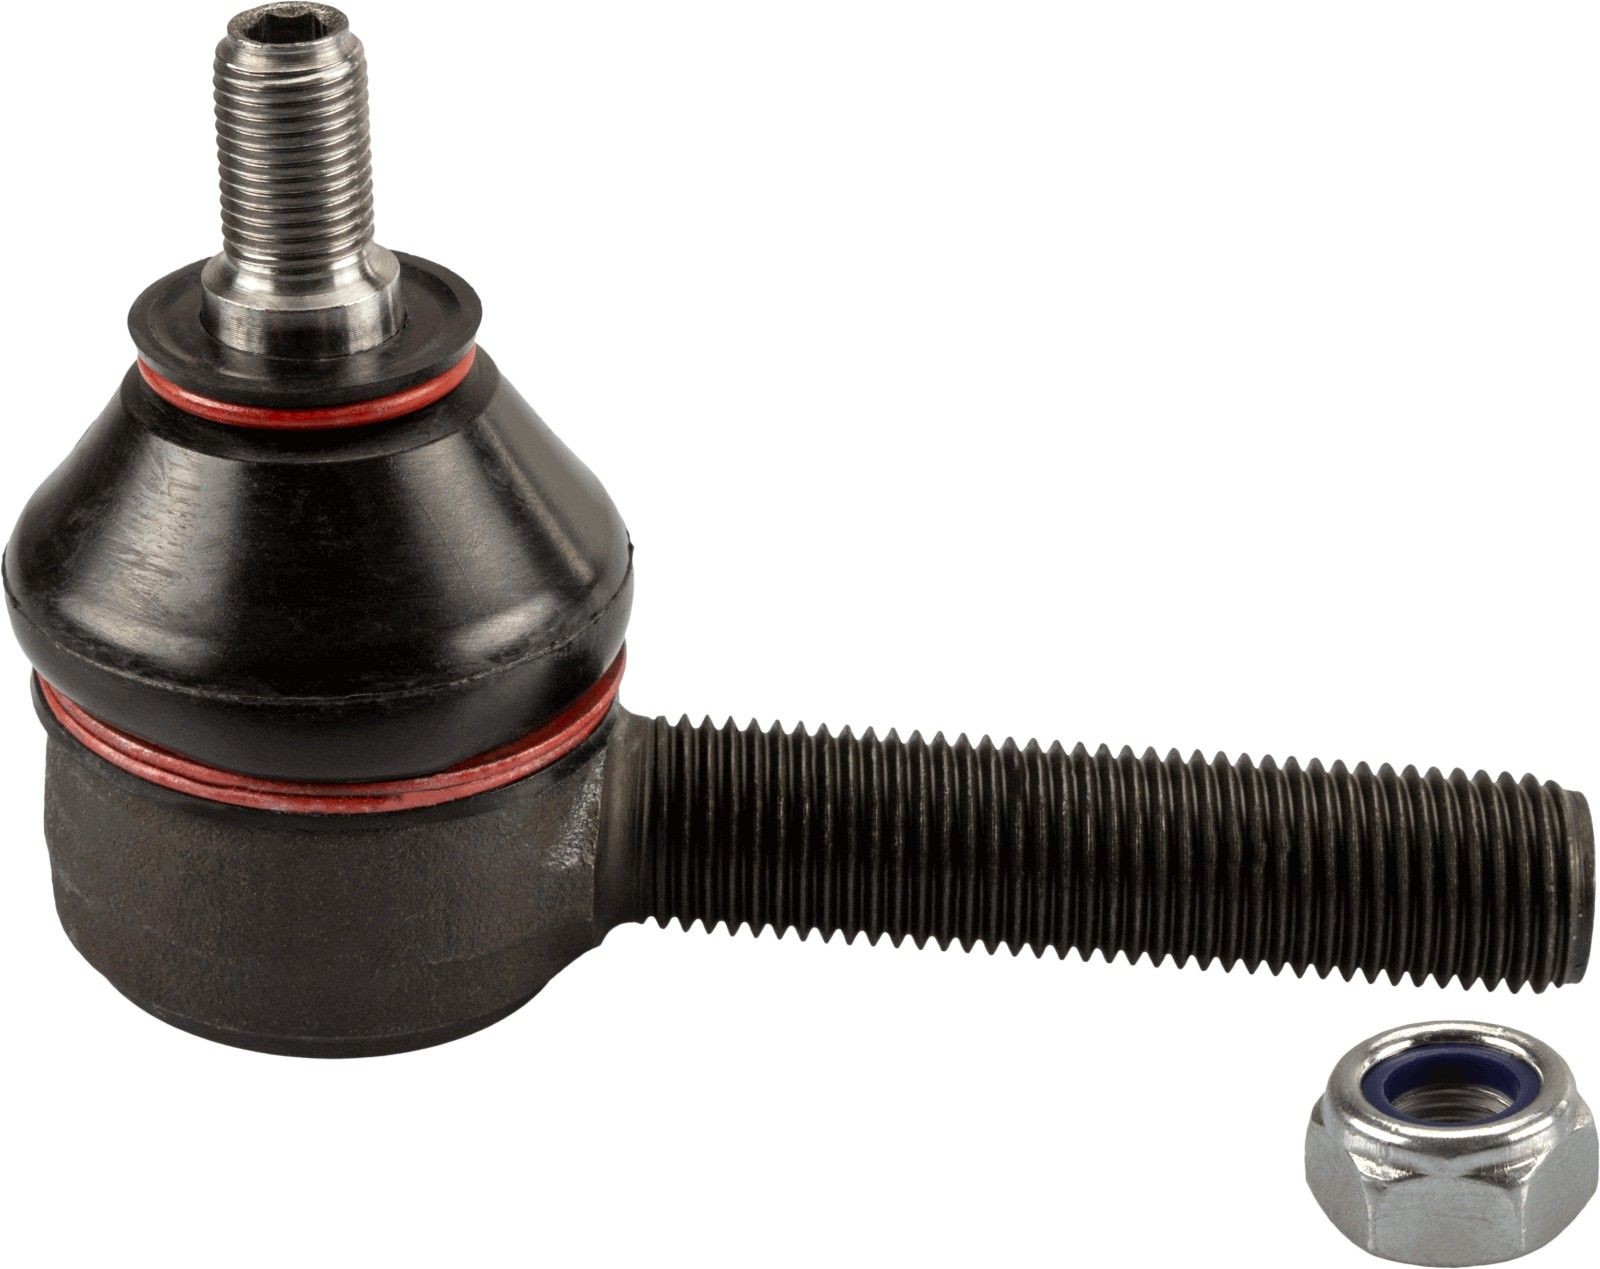 TRW Cone Size 14 mm, M14x1.5 mm, with accessories Cone Size: 14mm, Thread Type: with right-hand thread, Thread Size: M10x1 Tie rod end JTE397 buy